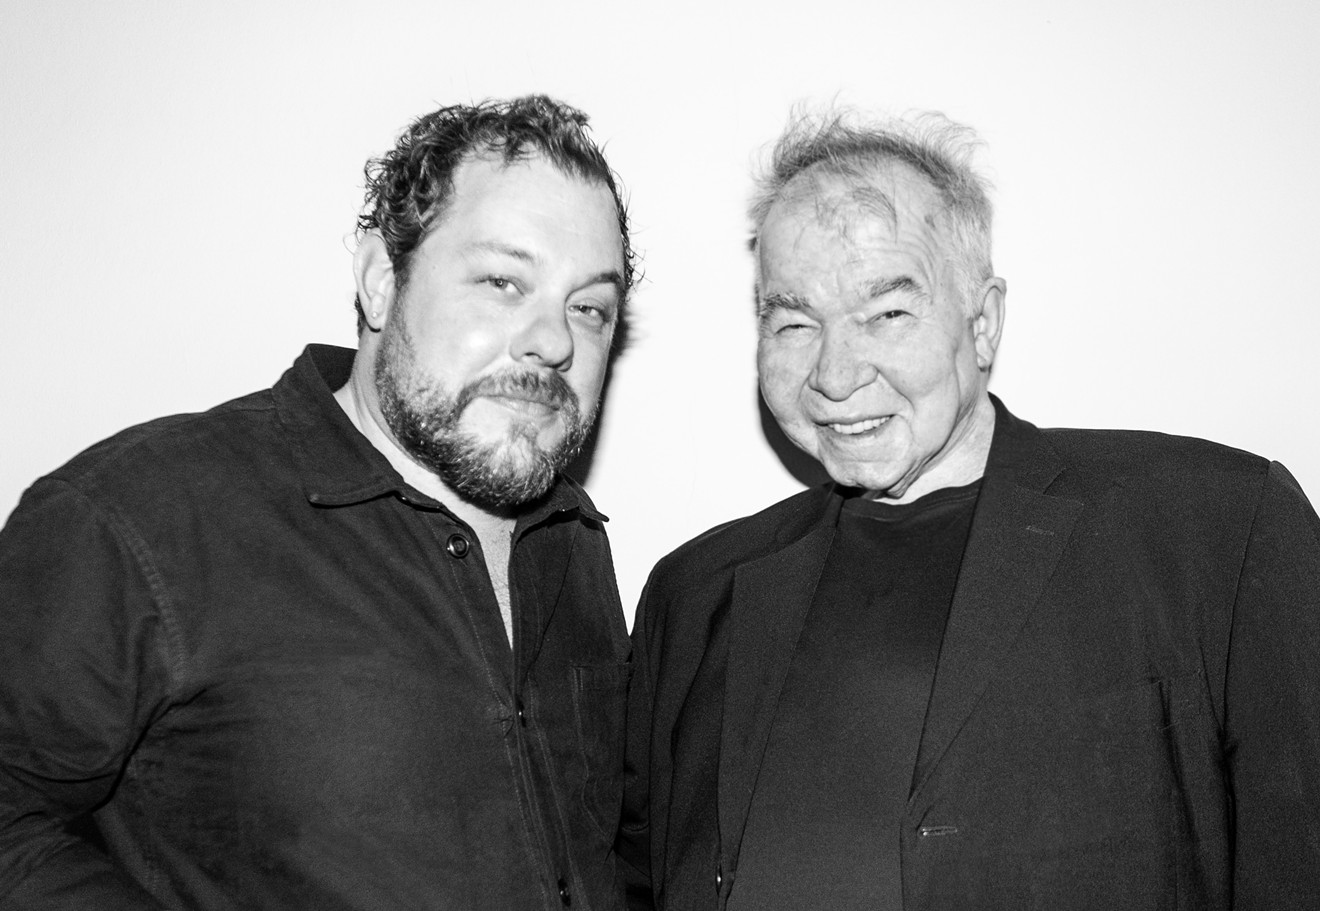 Nathaniel Rateliff and John Prine released two singles on December 13.